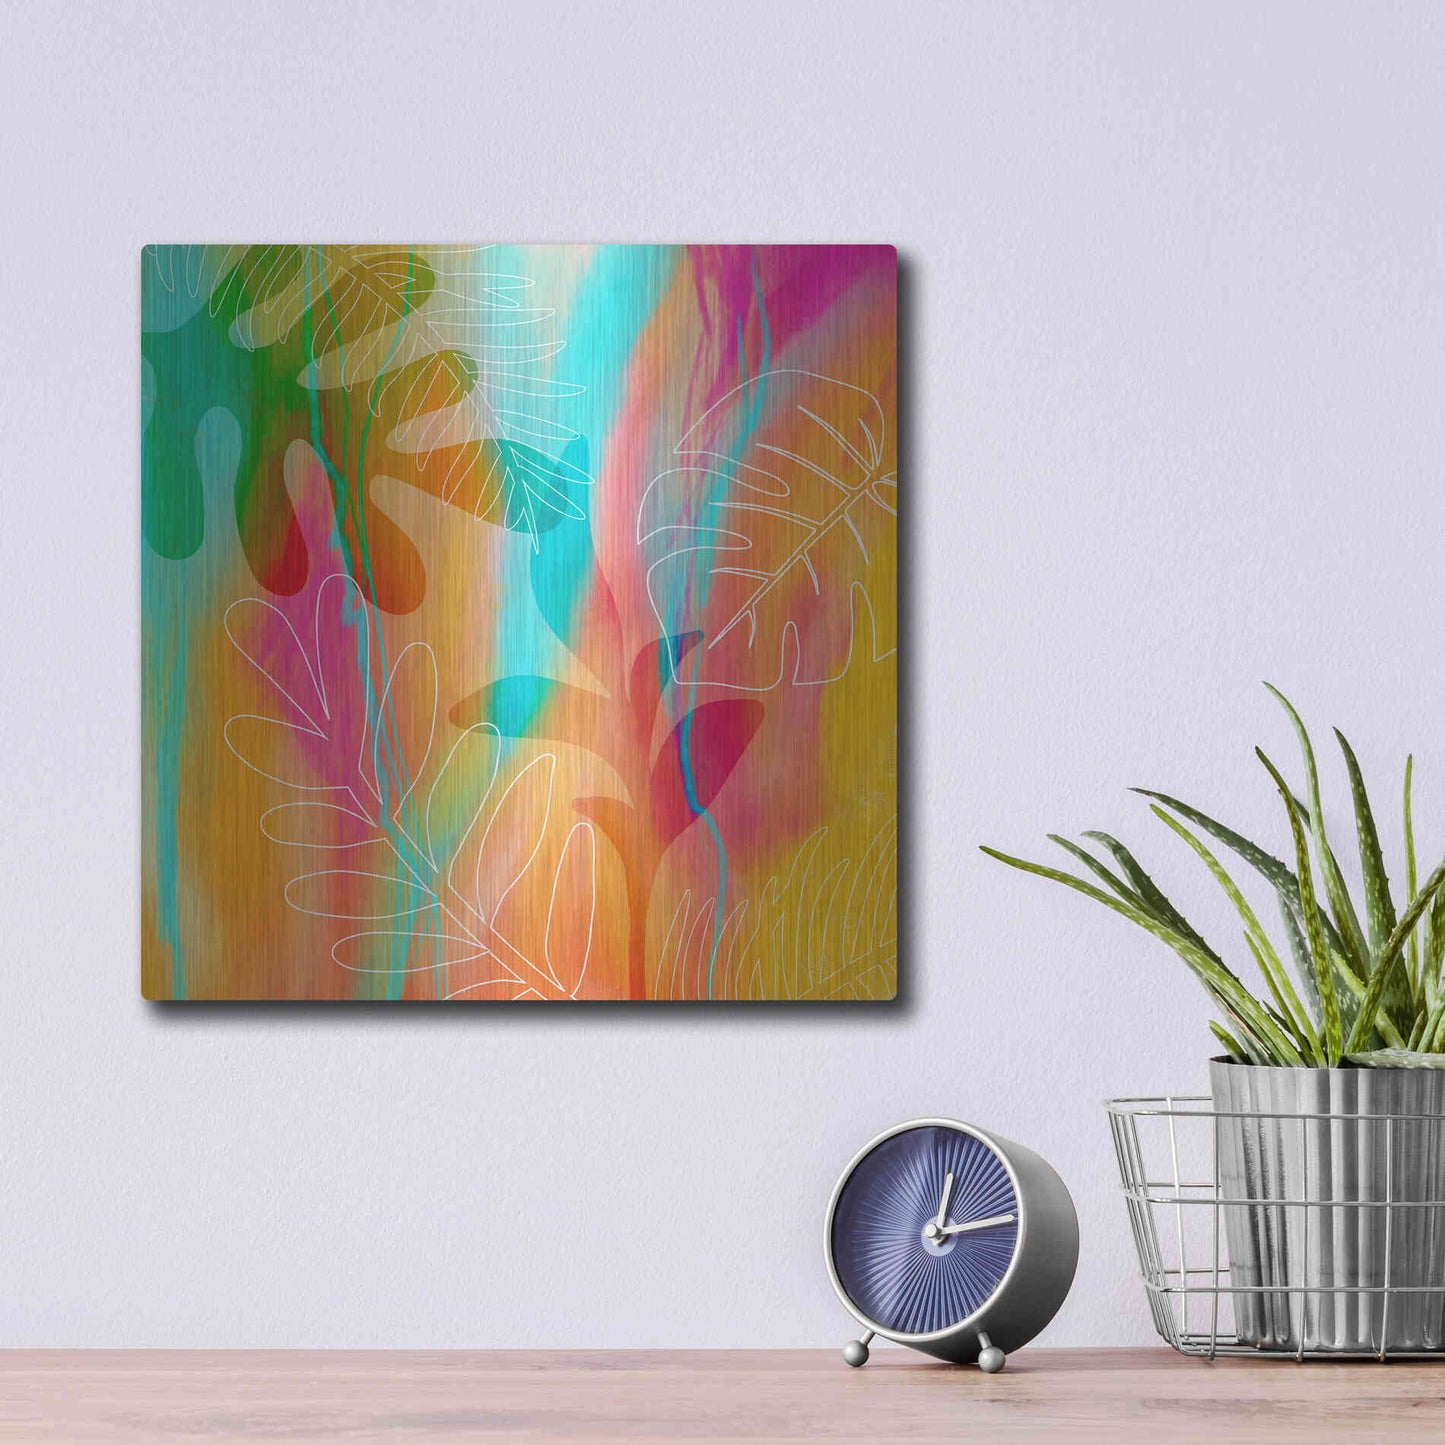 Luxe Metal Art 'Tropical Journey' by Andrea Haase, Metal Wall At,12x12